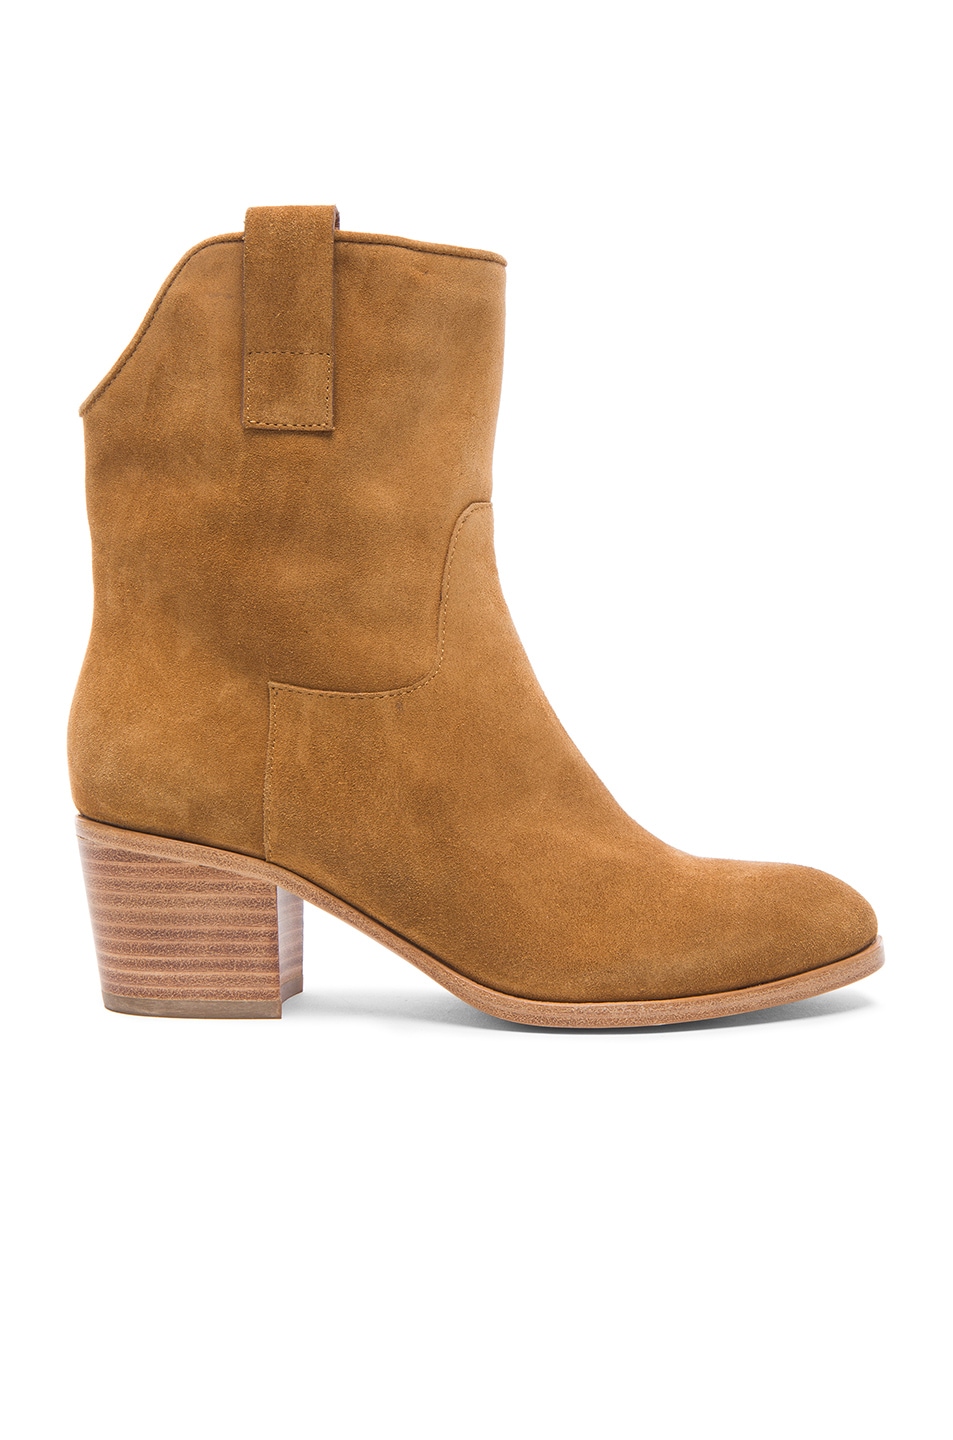 Image 1 of Sigerson Morrison Kimmy Suede Boots in Caramel